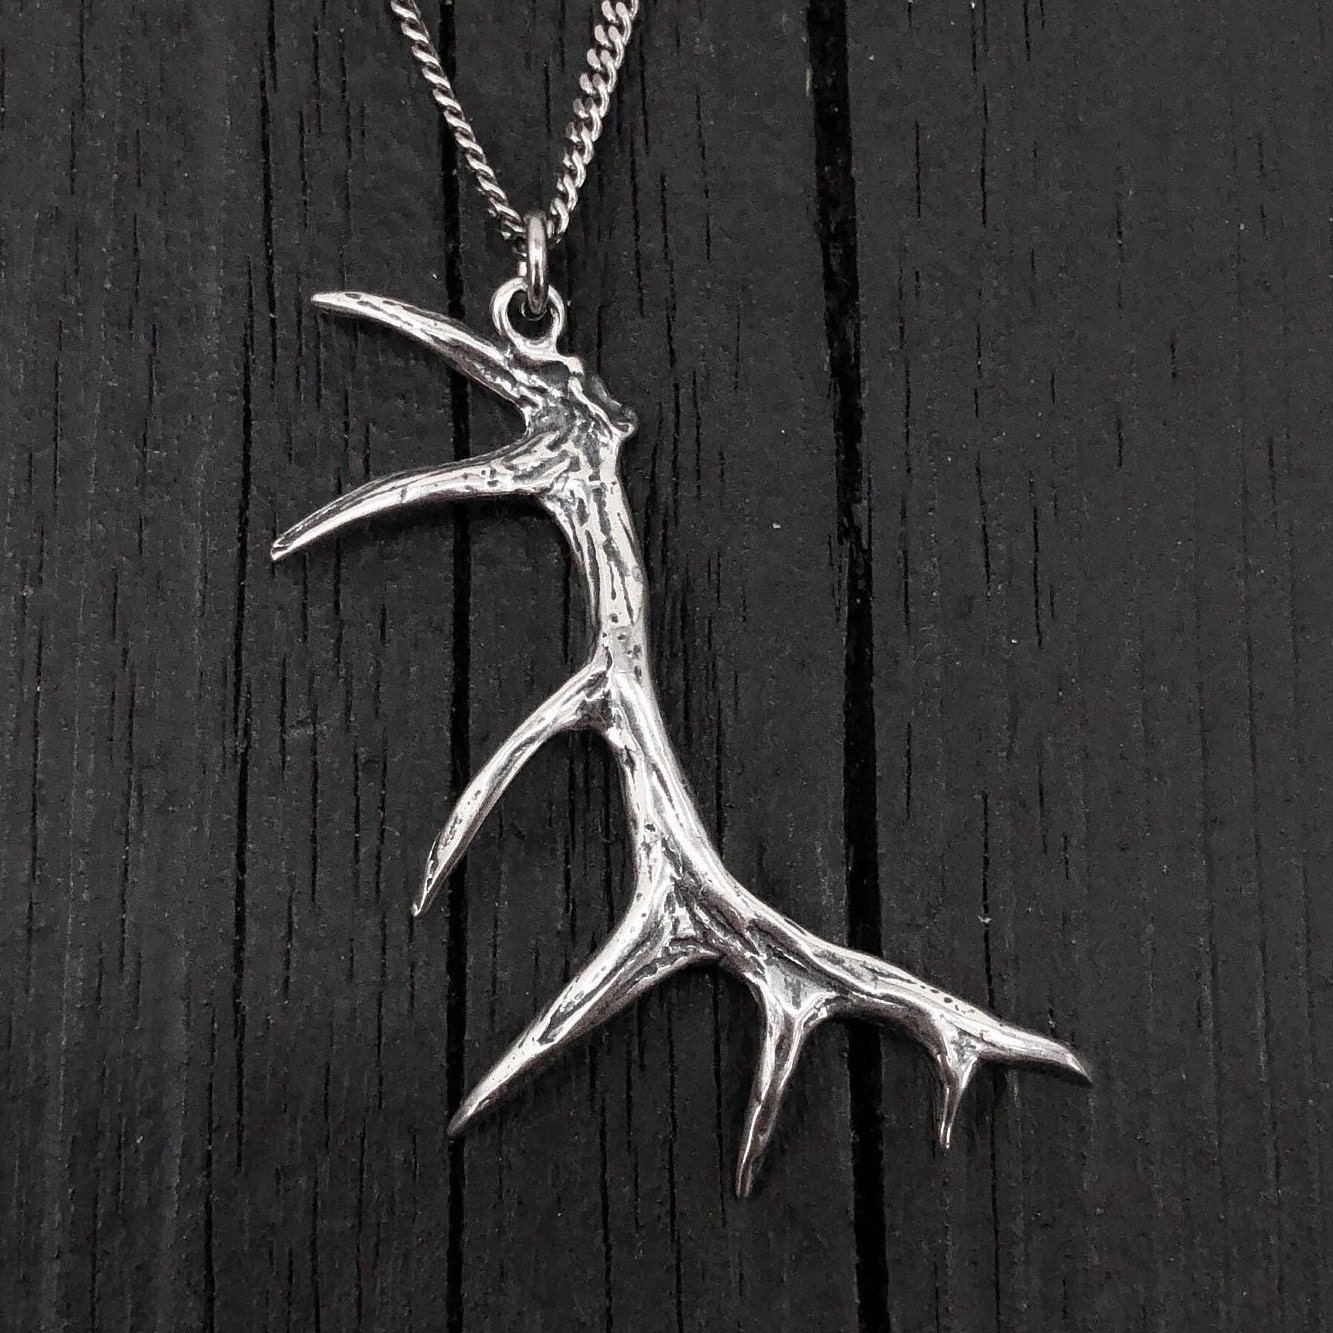 Rustic Wedding Men Hunt Unisex Handmade and Crafted by KapKaDesign Elk Antler Pendant Necklace Deer Jewelry Woodland Fashion Thin Sterling Silver Chain 